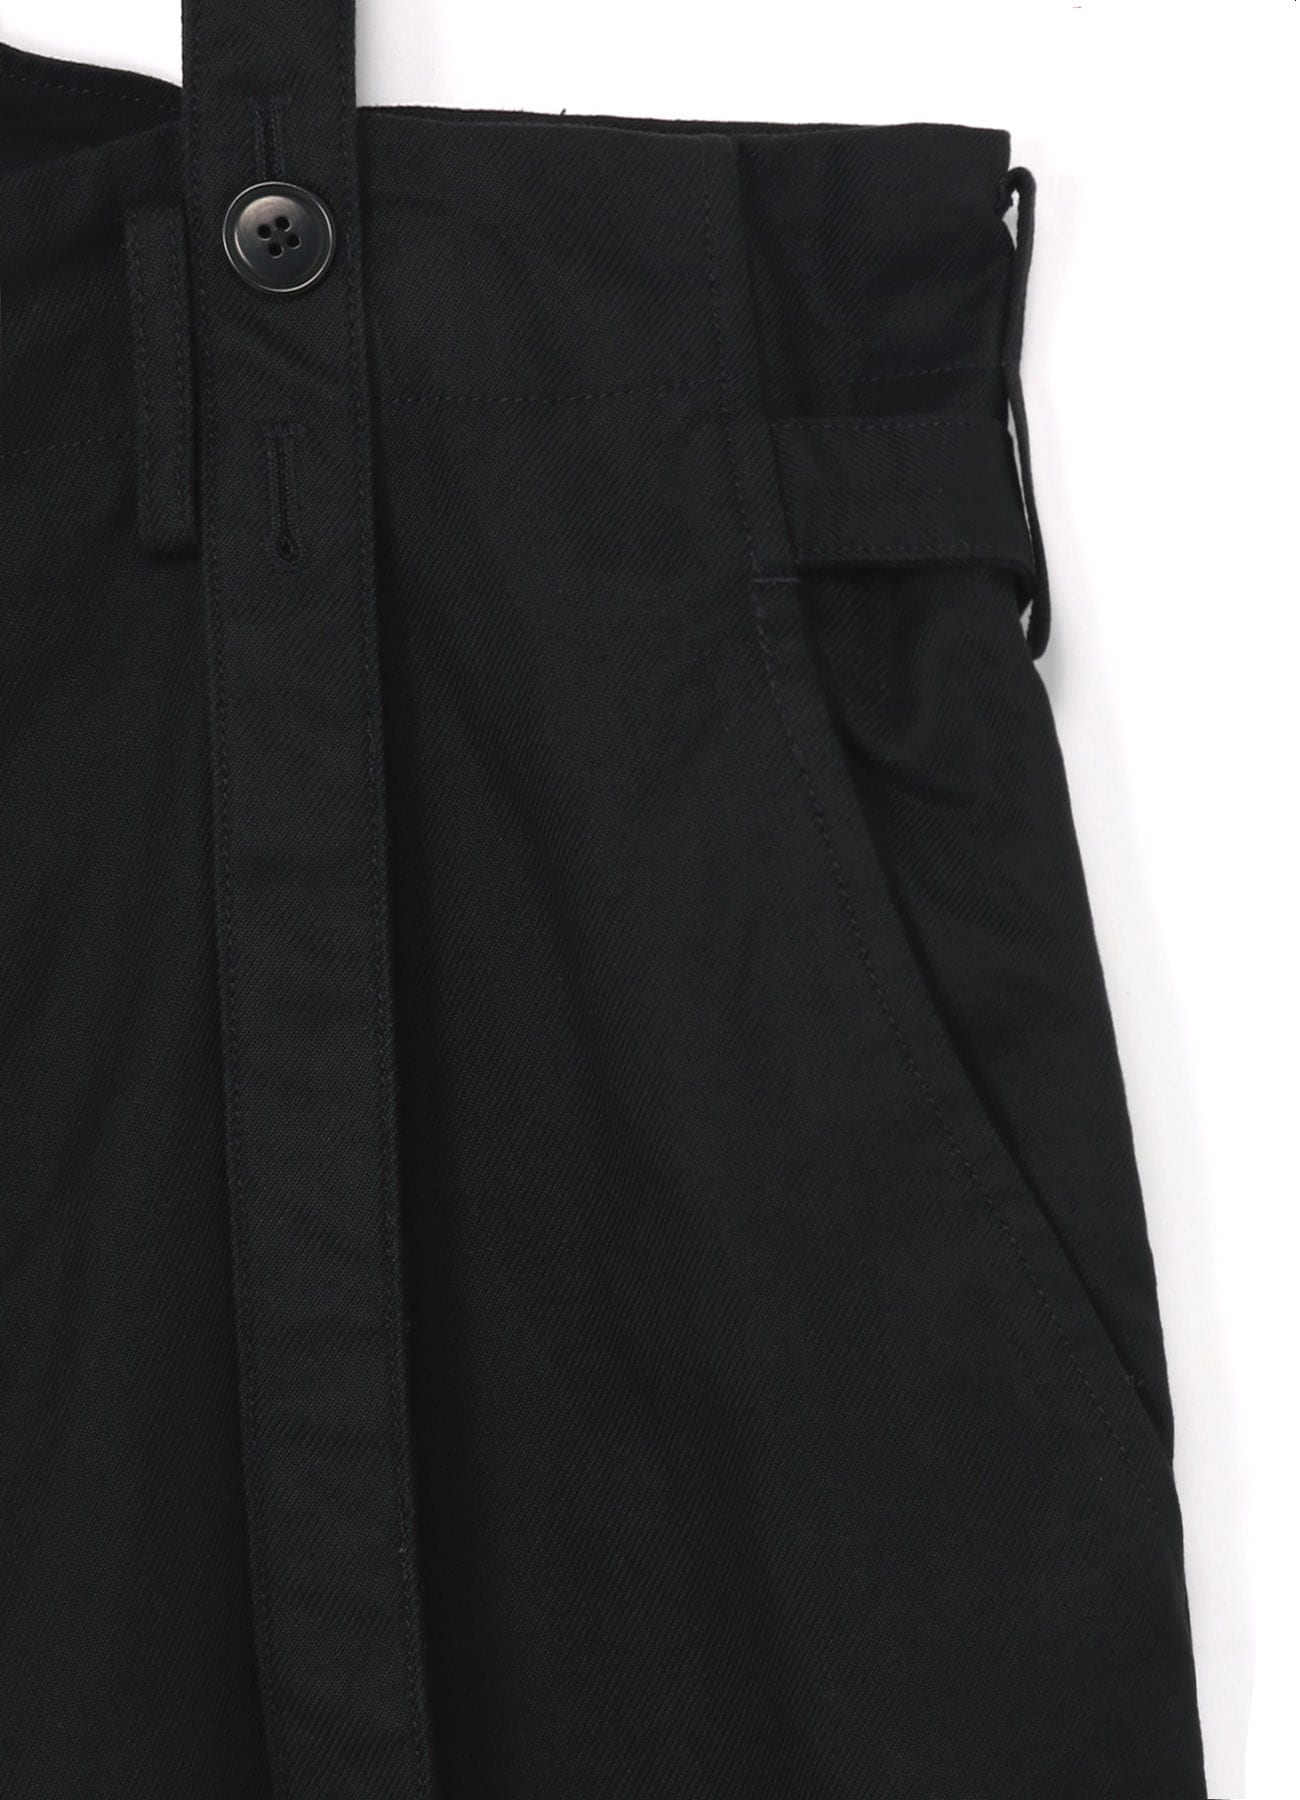 FRENCH WORKER SURGE SUSPENDER PANTS WITH HEM BUTTON DETAIL